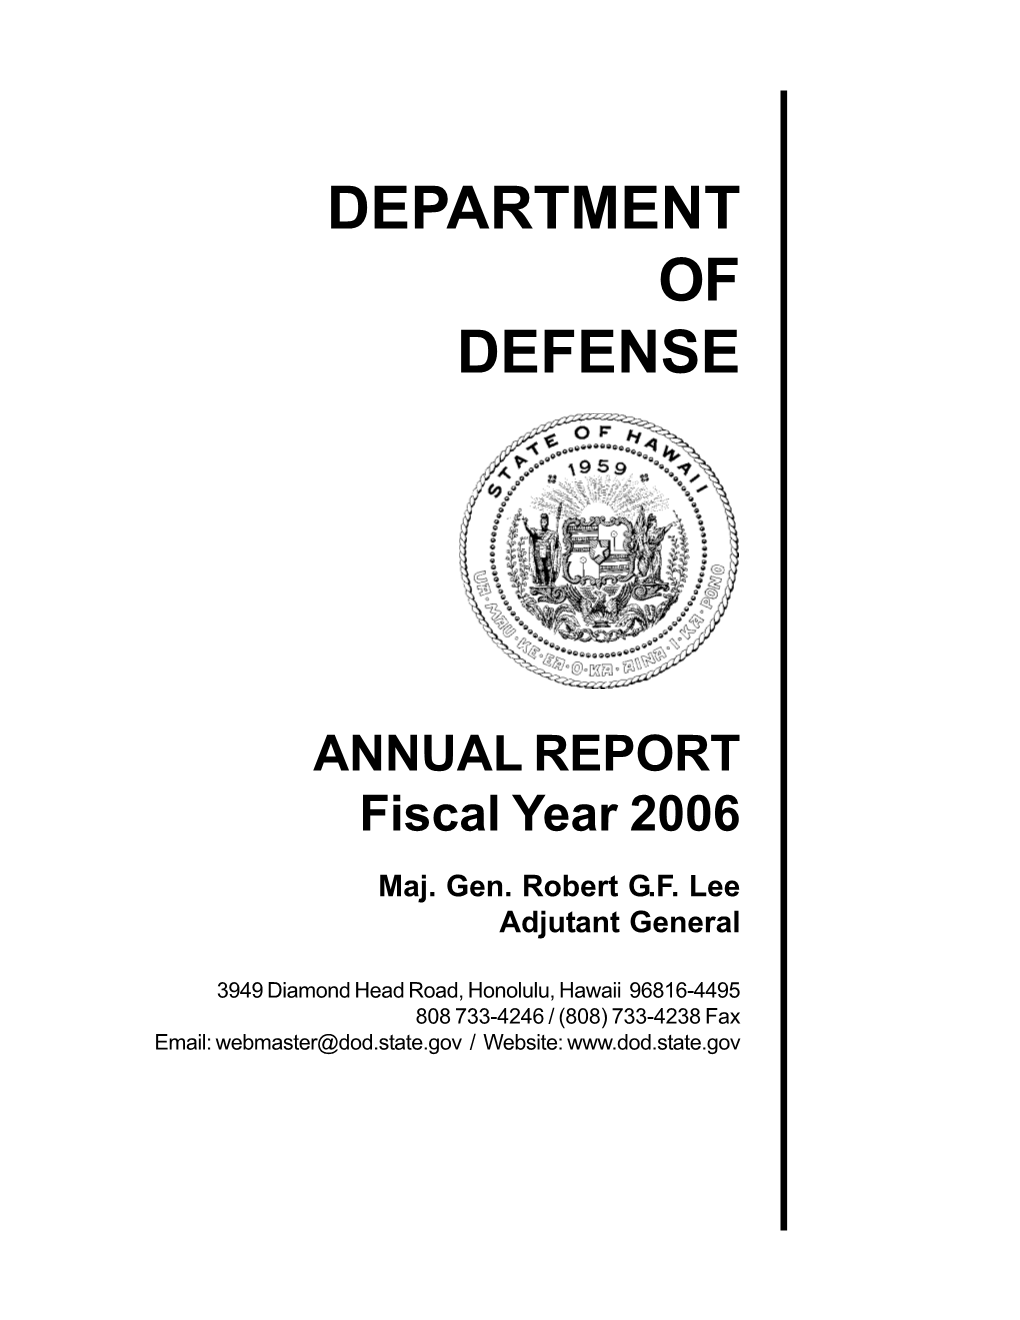 ANNUAL REPORT Fiscal Year 2006